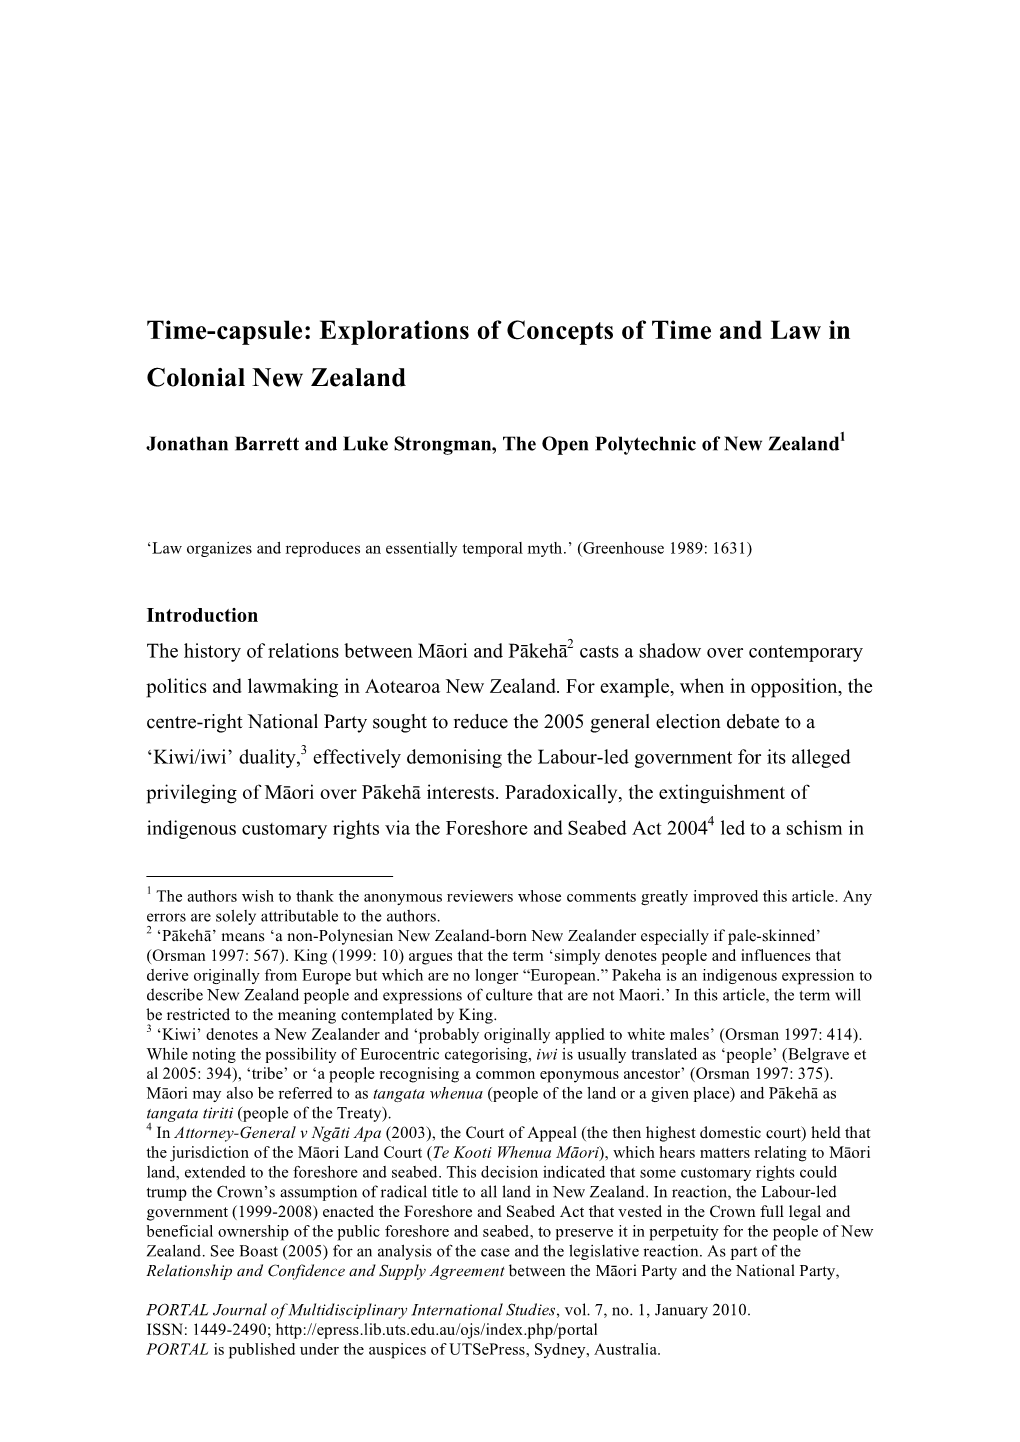 Time-Capsule: Explorations of Concepts of Time and Law in Colonial New Zealand